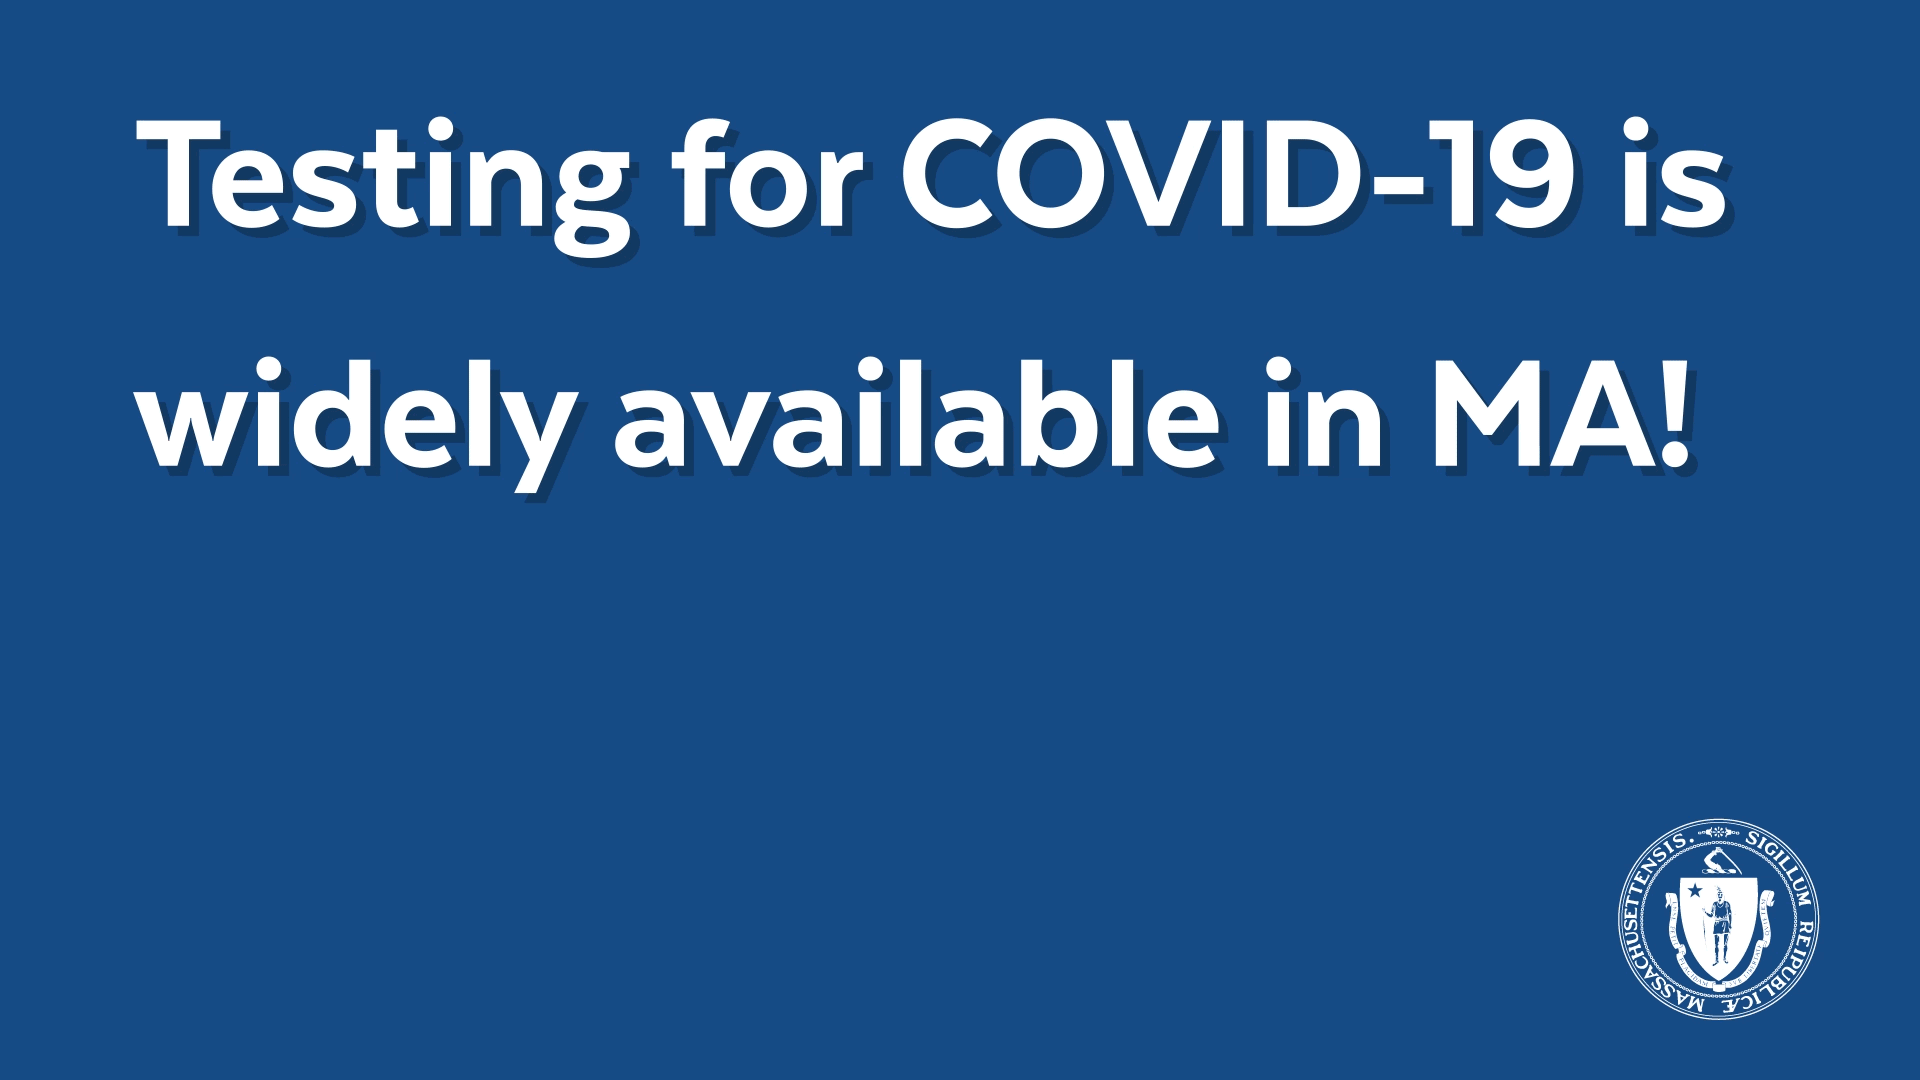 Testing for COVID-19 is widely available in MA!